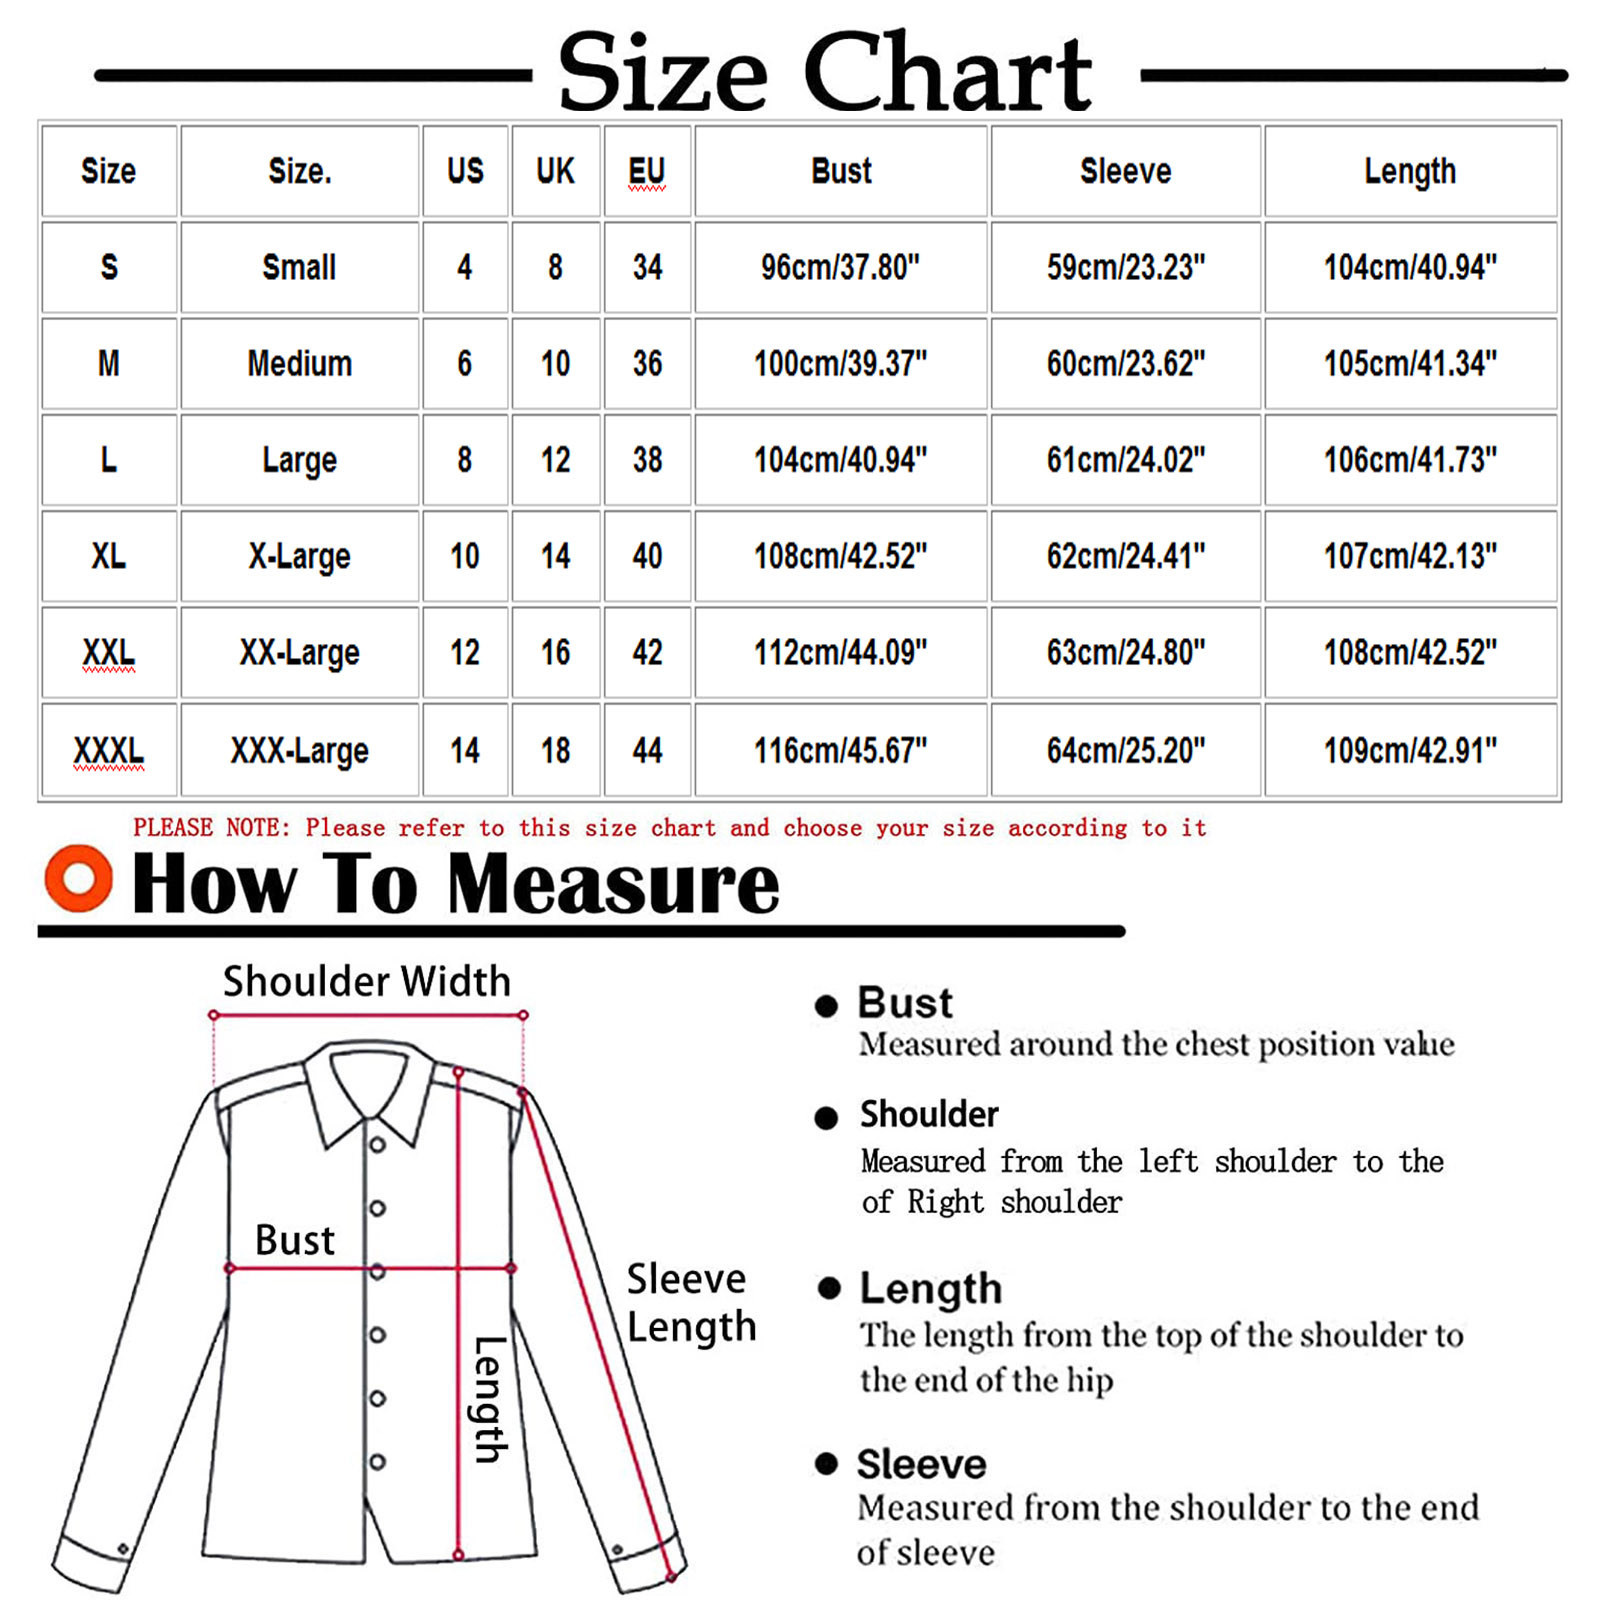 Hfyihgf Women's Double Breasted Trench Coat Classic Notch Collar Long Sleeve Peacoats Winter Warm Slim Fit Long Woolen Jackets Coat with Pockets Clearance(Khaki,L) - image 3 of 5